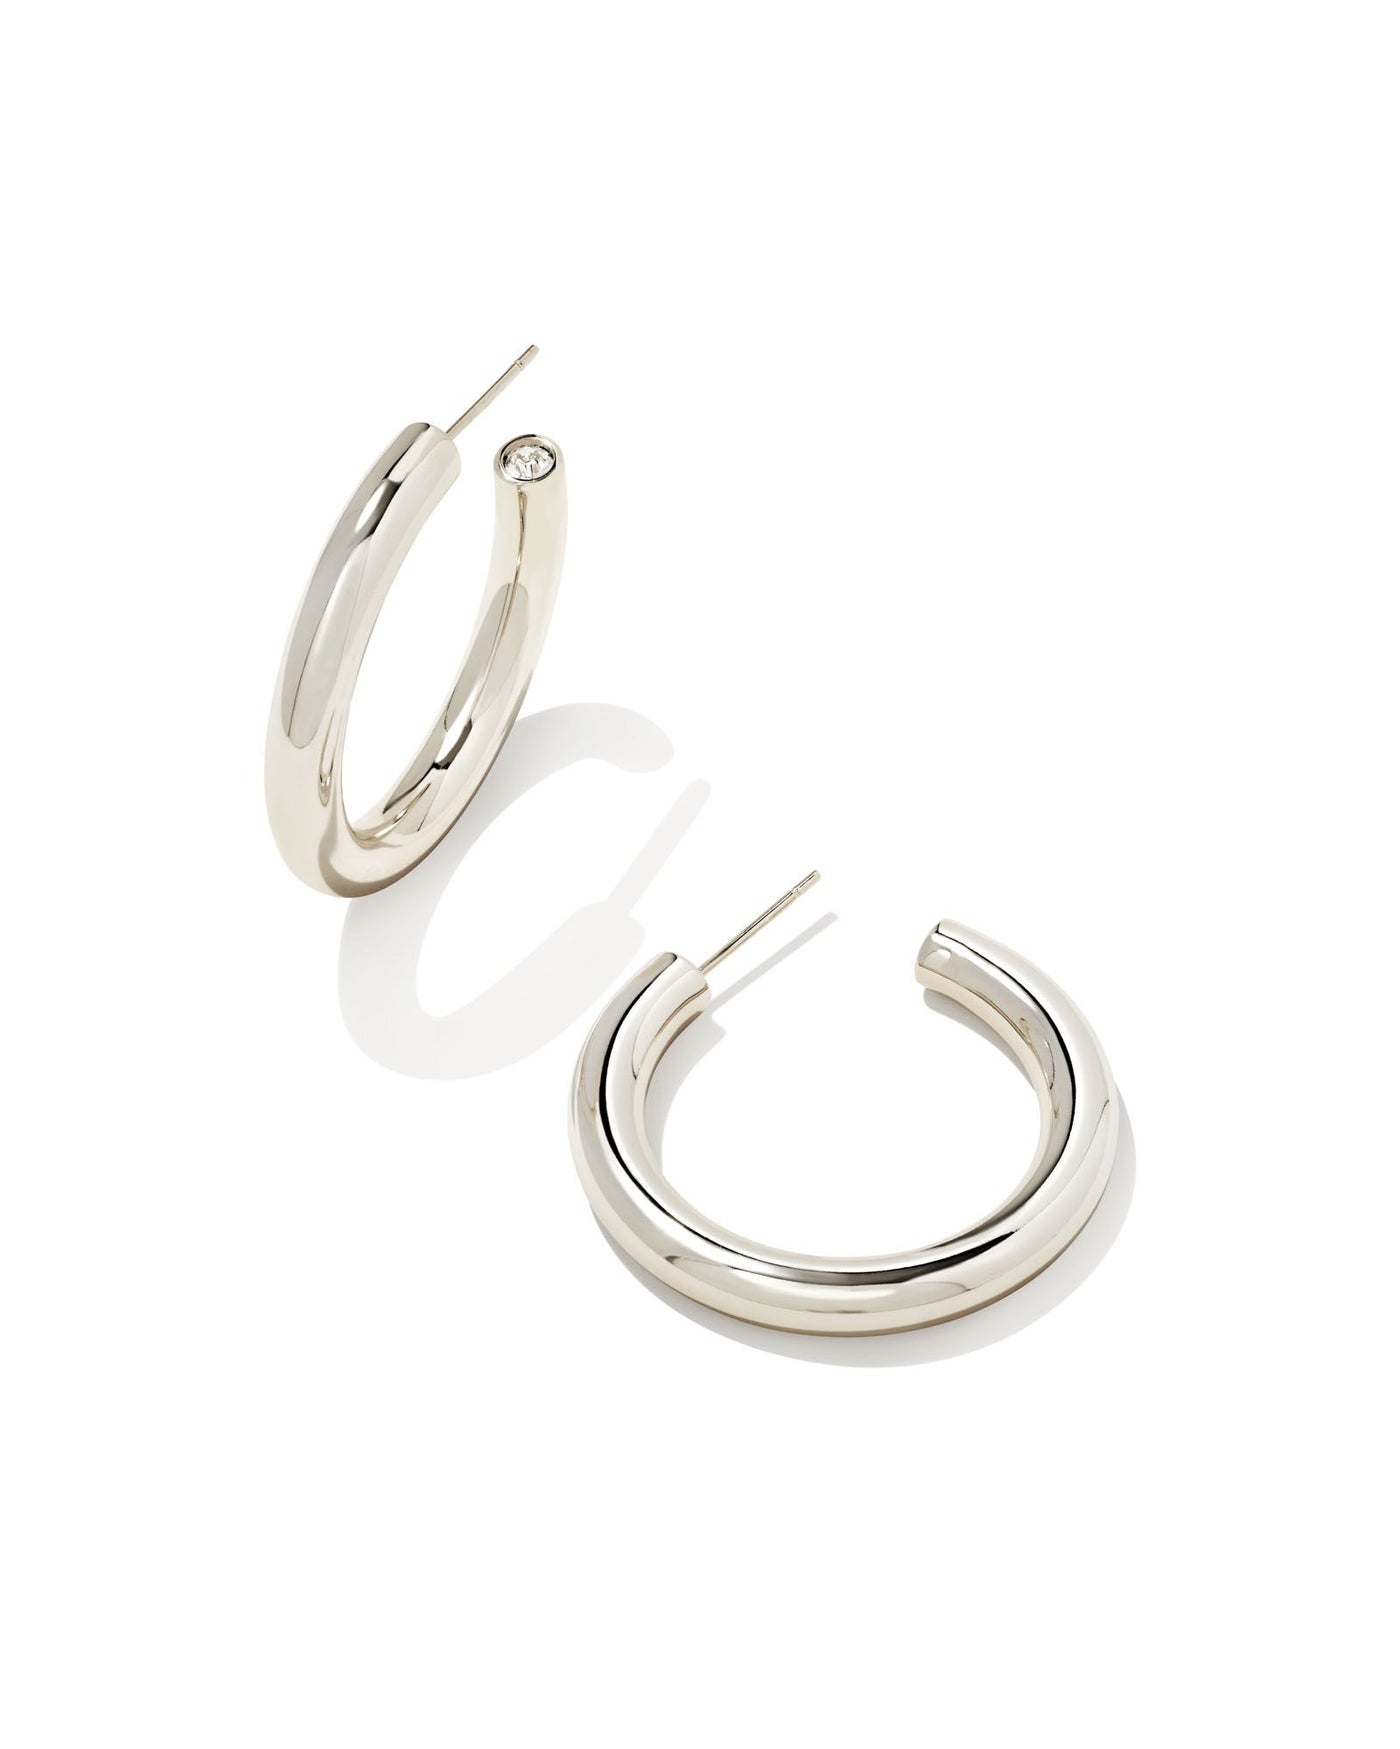 Kendra Scott Colette Hoop Earrings in Silver-Earrings-Kendra Scott-Market Street Nest, Fashionable Clothing, Shoes and Home Décor Located in Mabank, TX